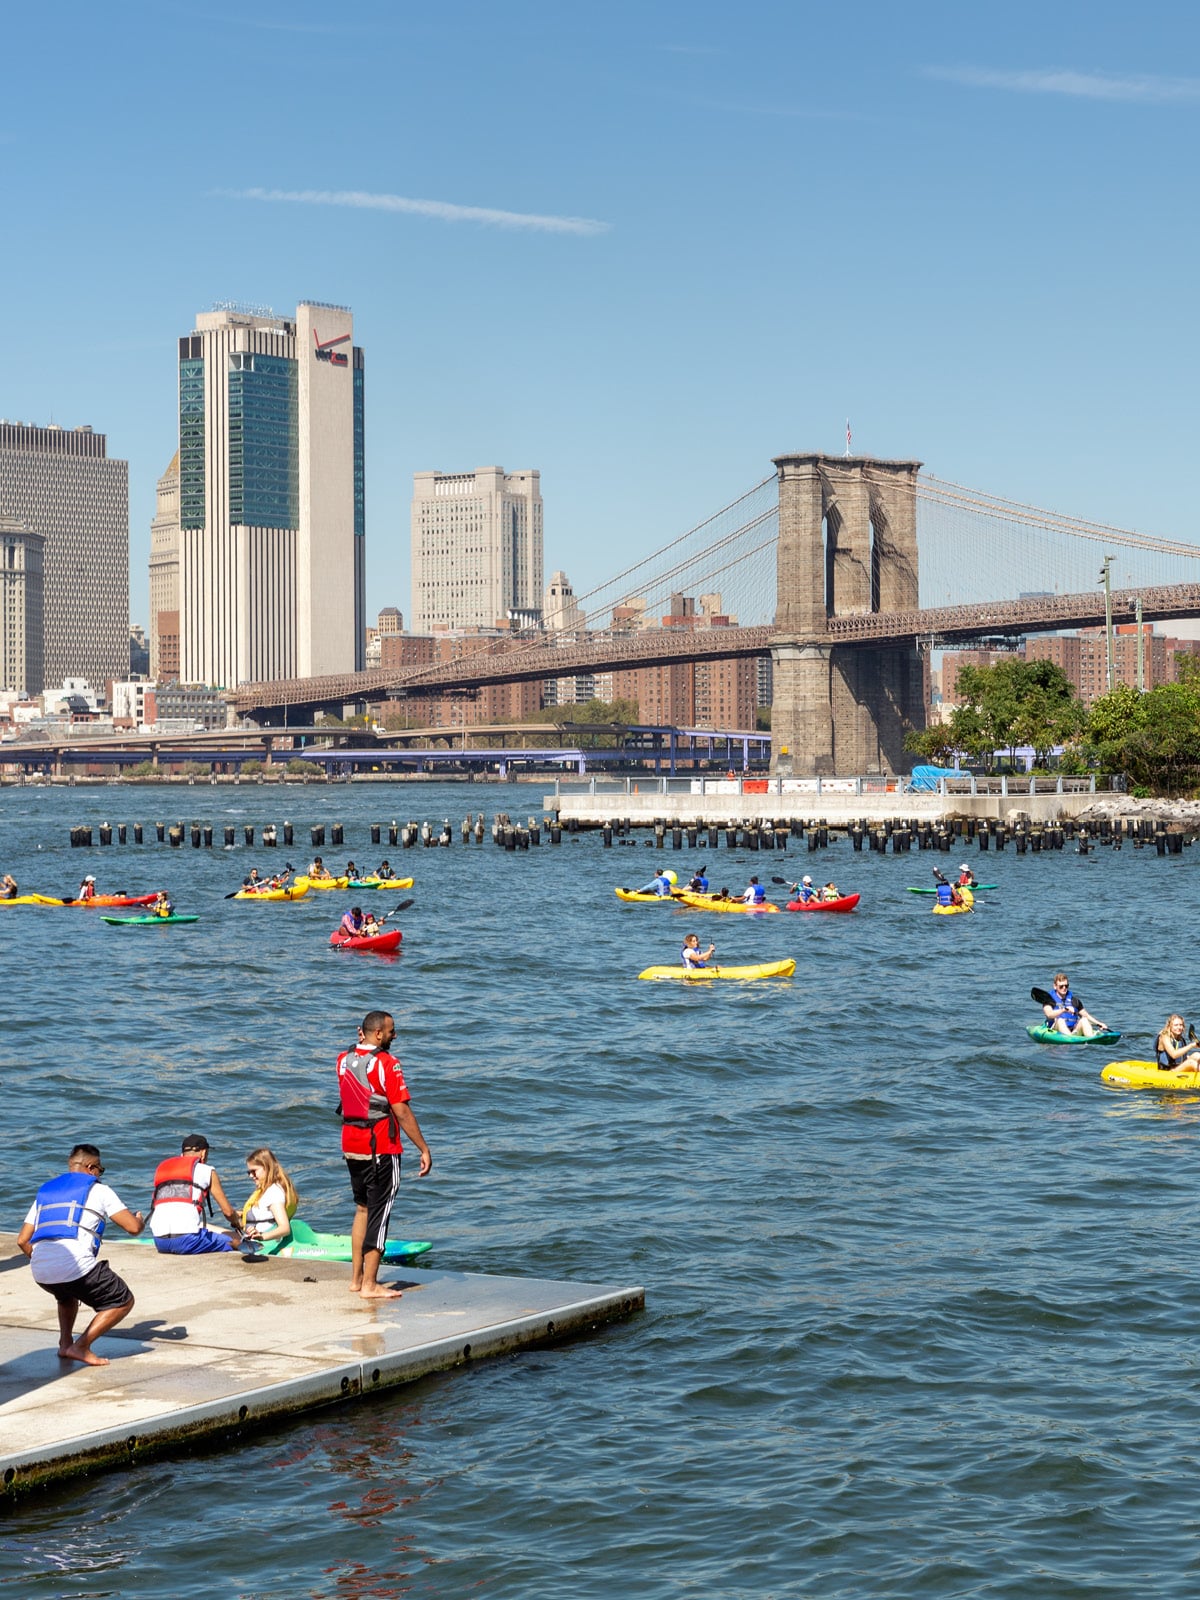 People standing on the dock looking at kayakers in the water on a sunny day. The Brooklyn Bridge is seen in the background.